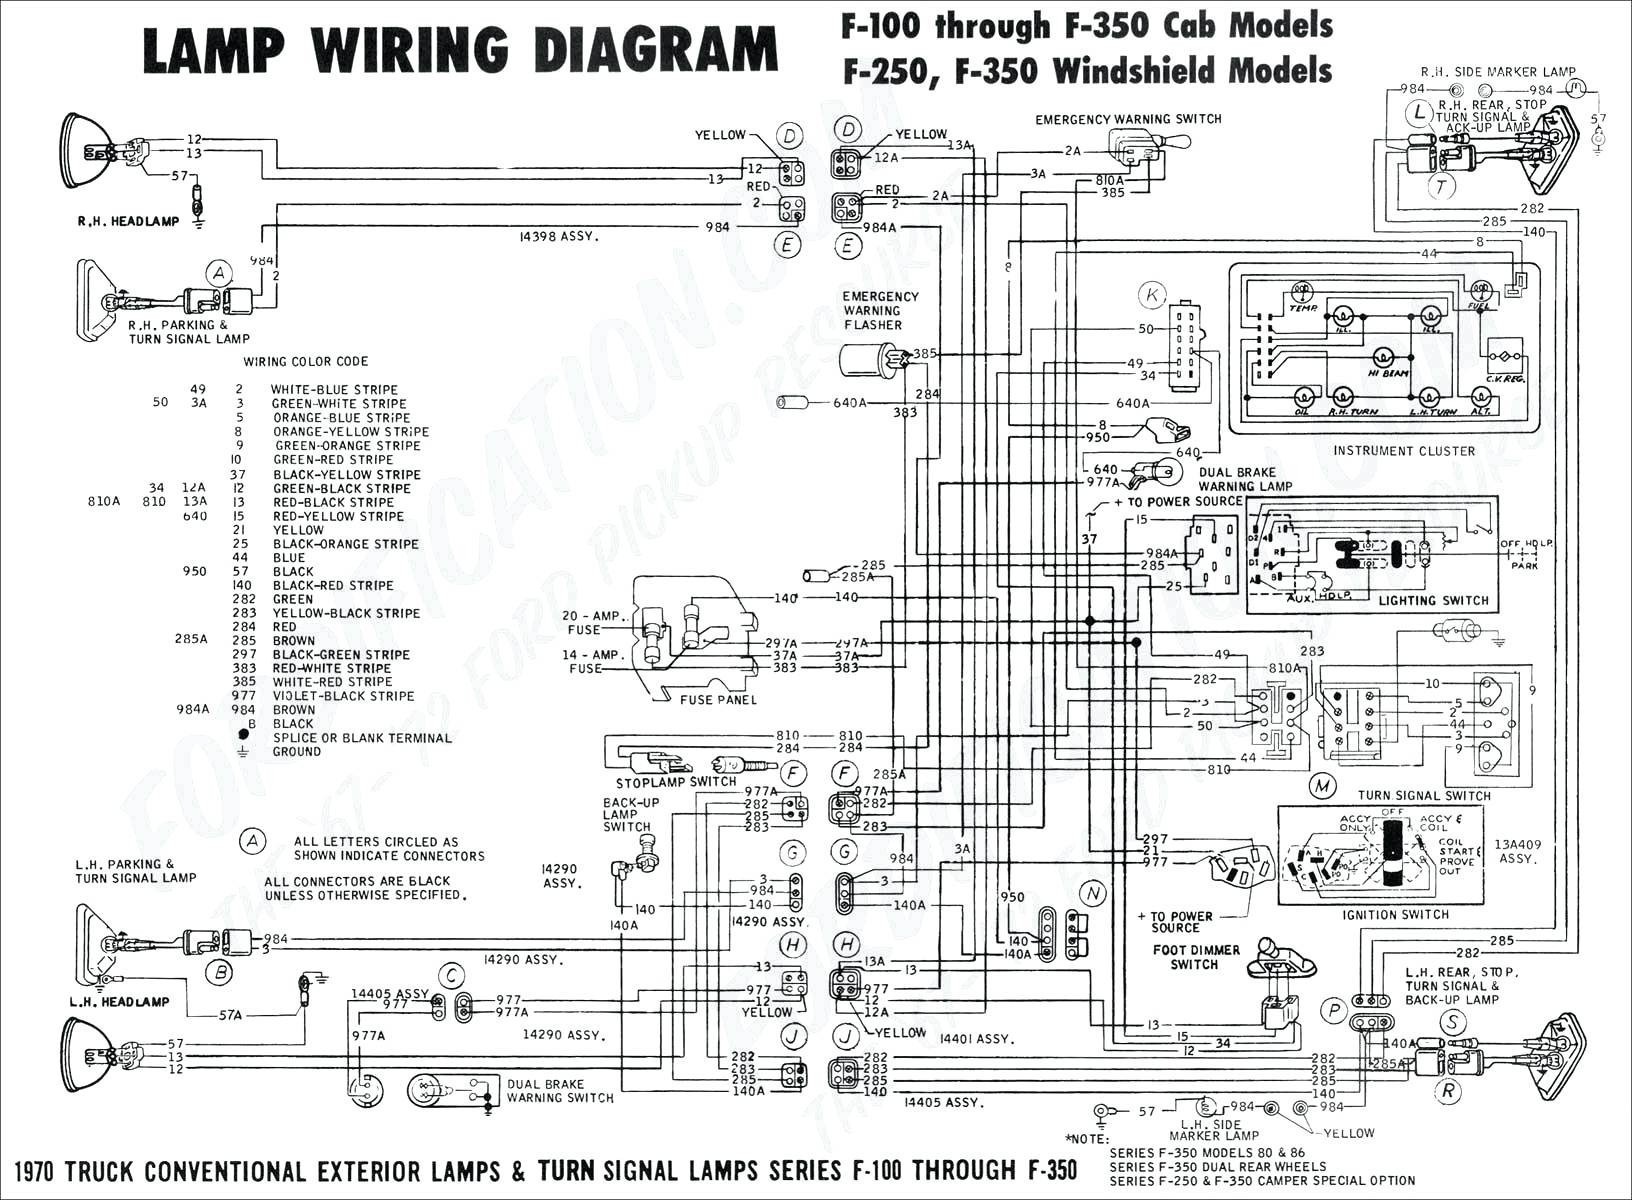 1972 Chevy Truck Wiring Diagram 72 Chevy Fuse Box Diagram Wiring Diagram toolbox Of 1972 Chevy Truck Wiring Diagram